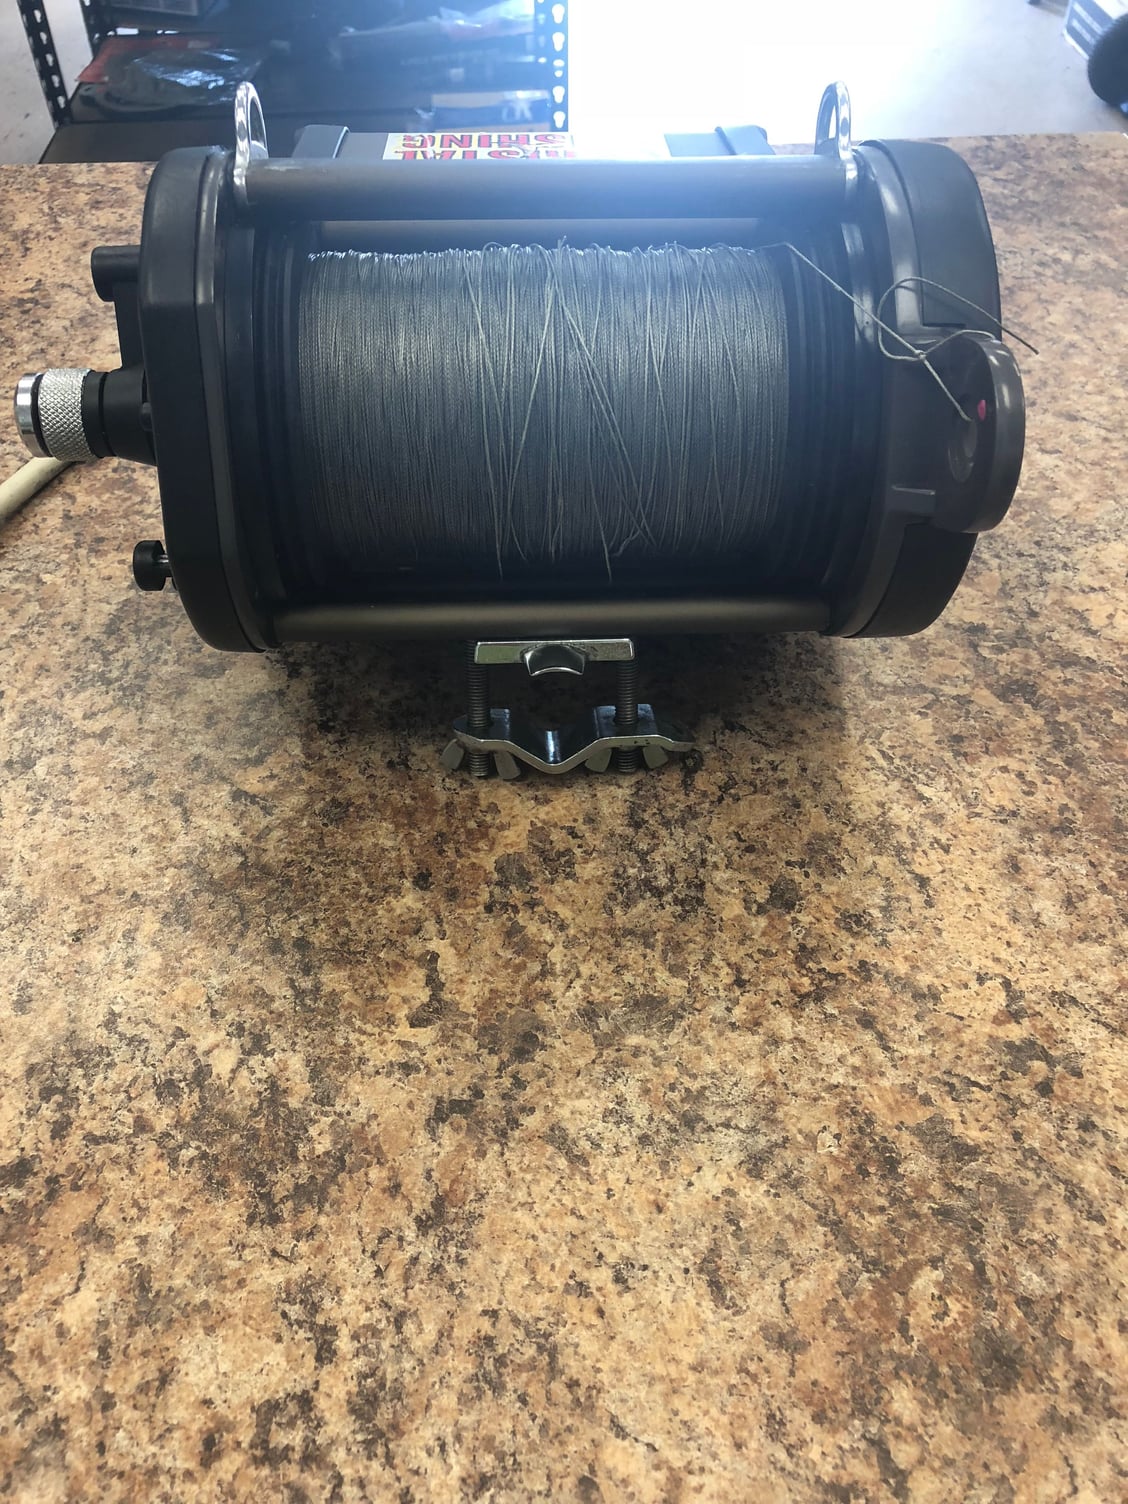 Kristal Fishing series 600, XL 651 electric reel $1250 - The Hull Truth -  Boating and Fishing Forum